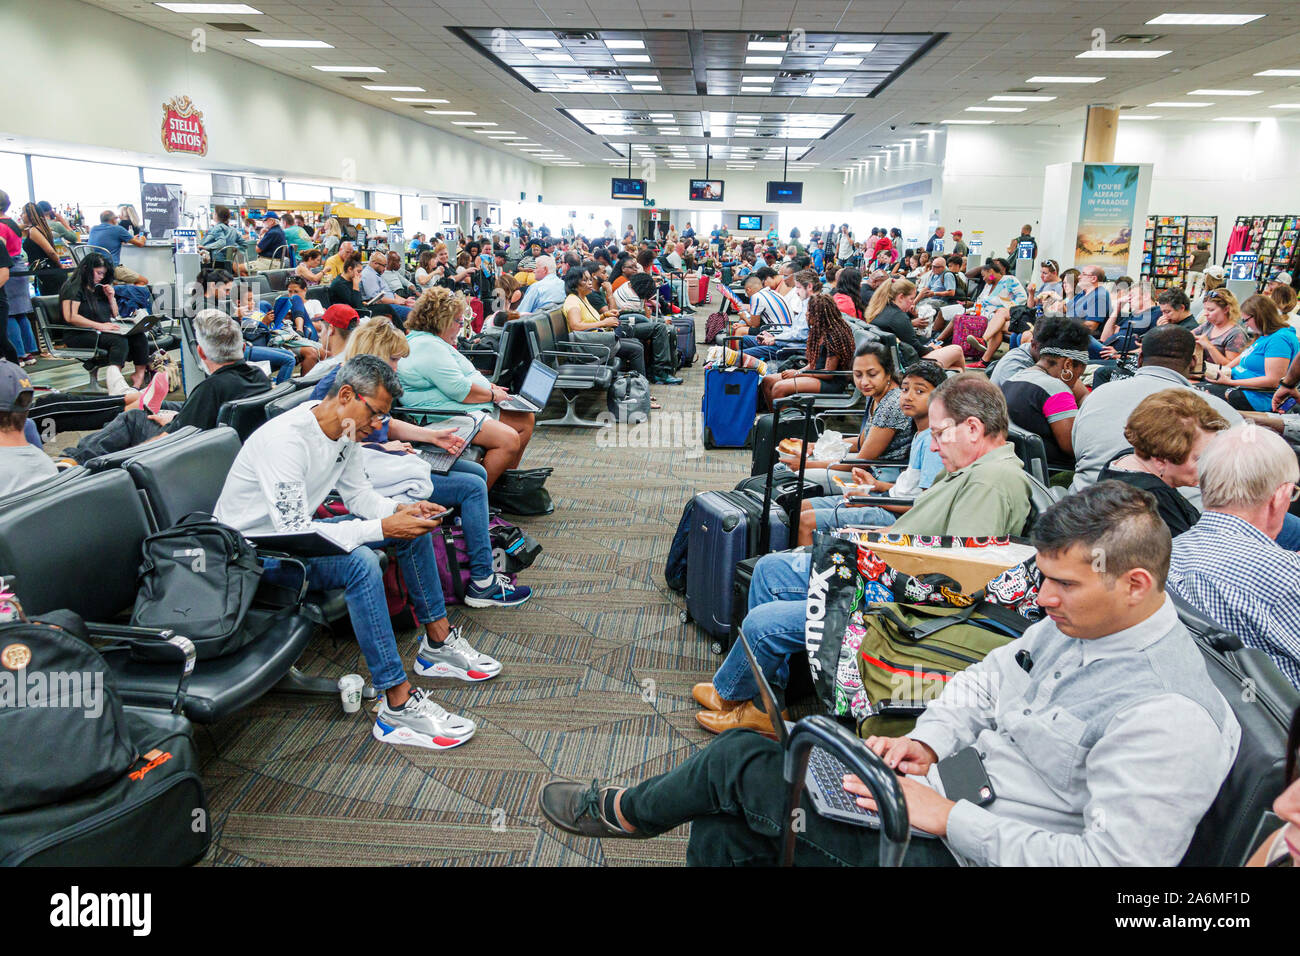 Fort Ft. Lauderdale Florida,Fort Lauderdale-Hollywood International Airport FLL,Terminal 2,inside,passenger gate,seating,crowded,man,woman,luggage,FL1 Stock Photo